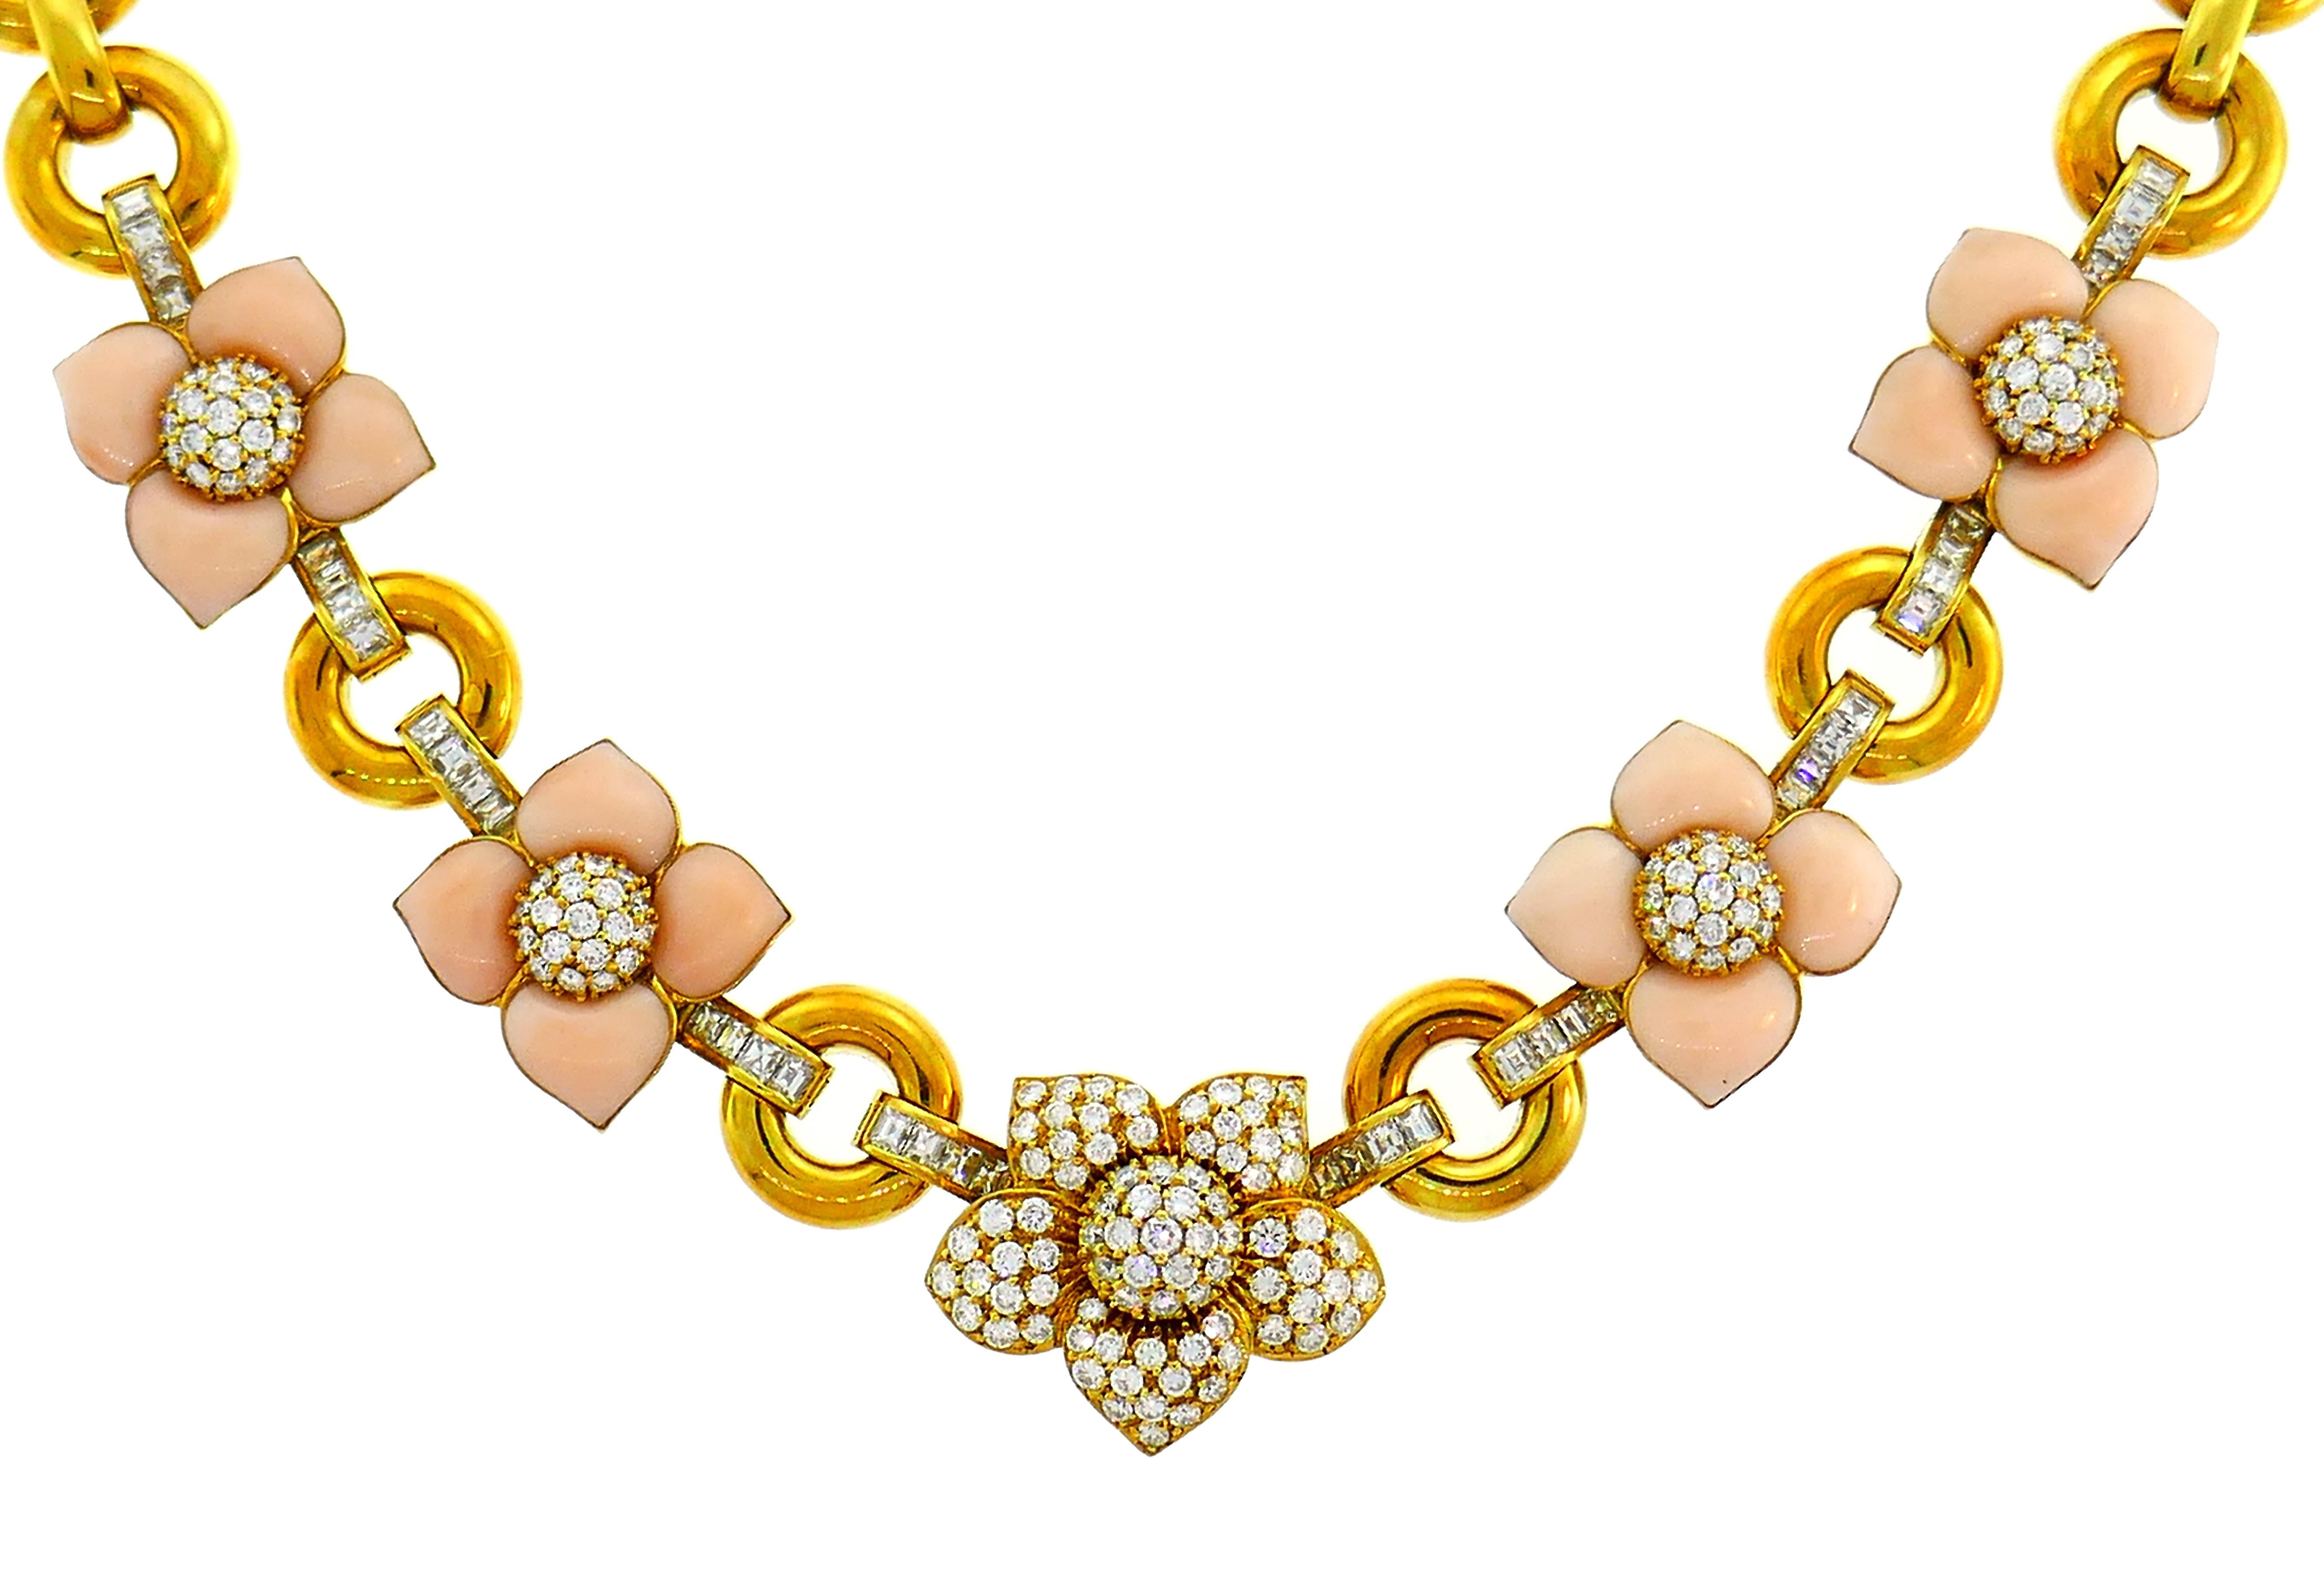 Women's Van Cleef & Arpels Vintage Alhambra Gold Necklace with Coral and Diamond